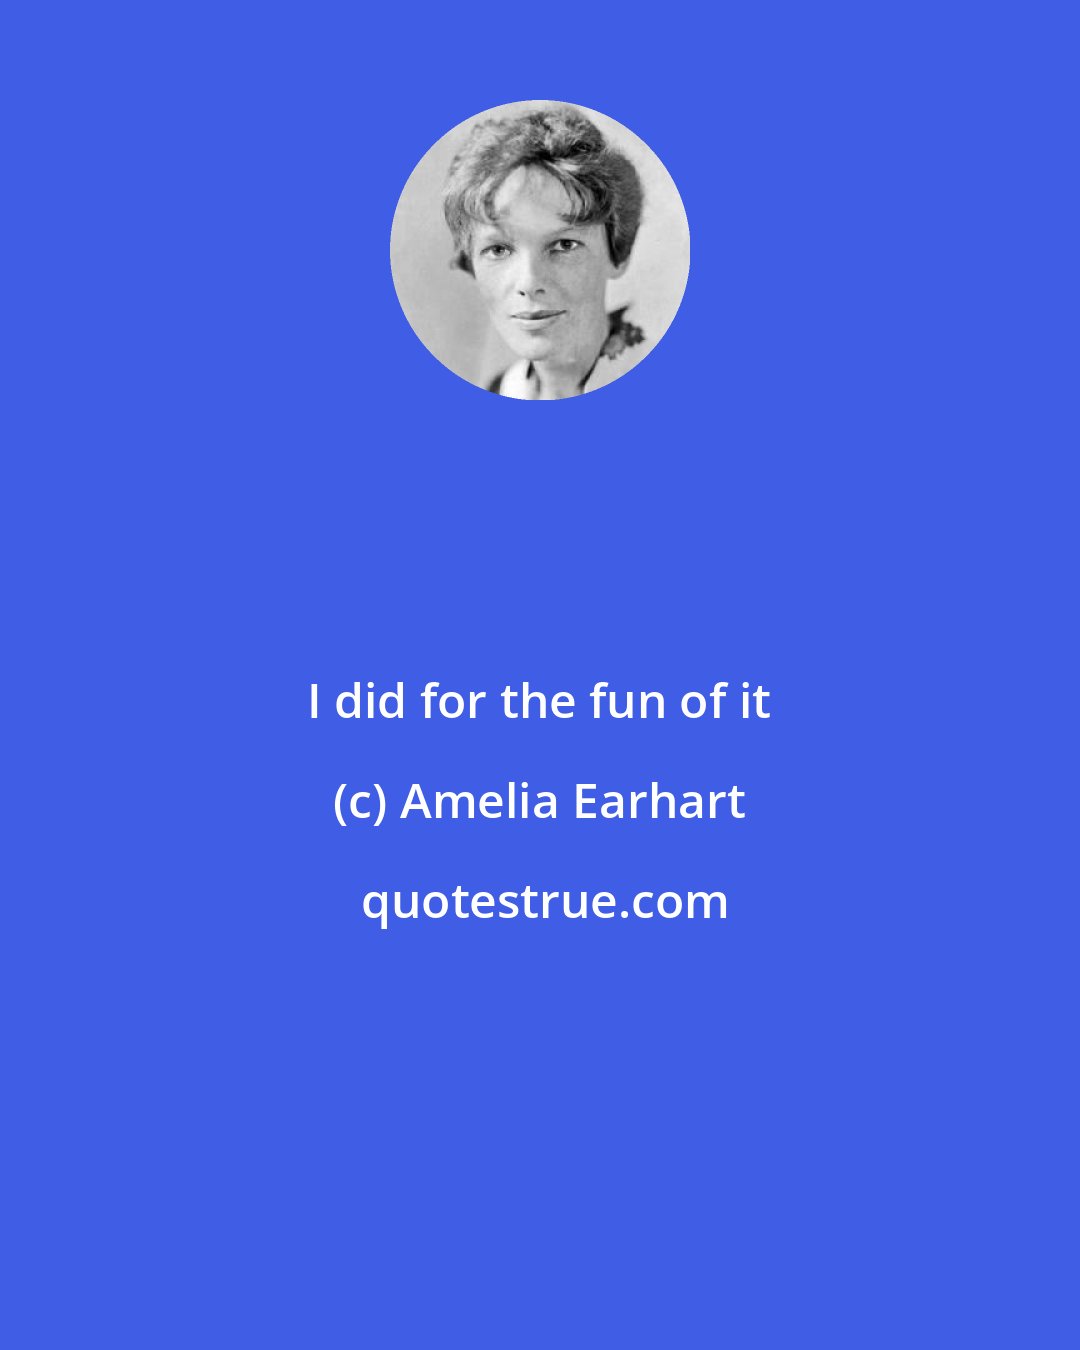 Amelia Earhart: I did for the fun of it